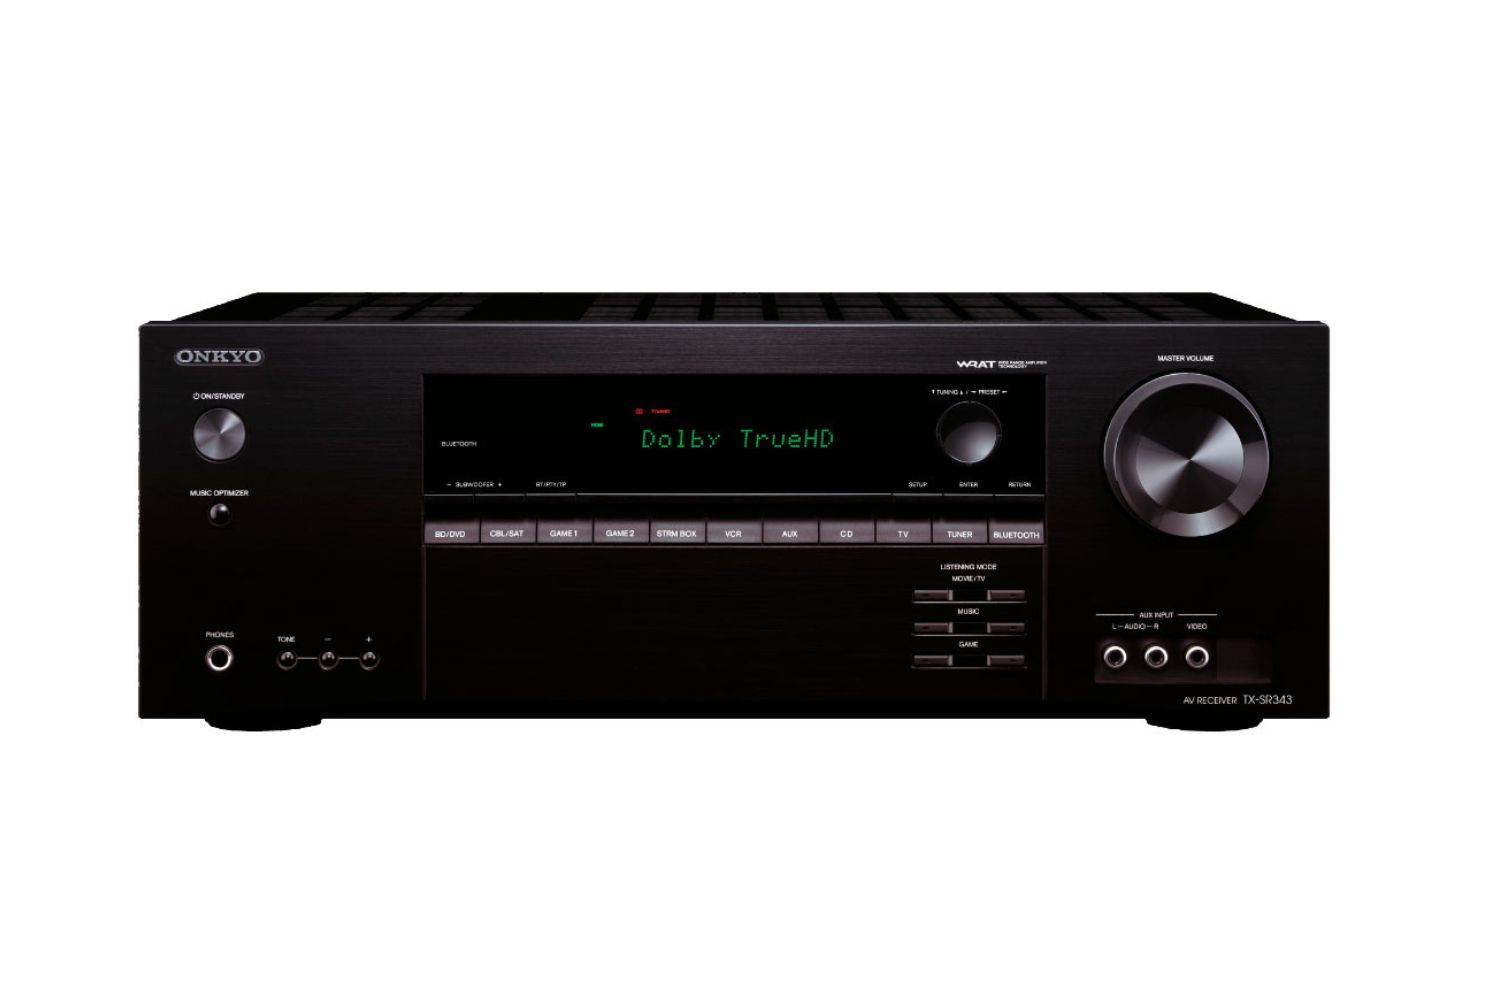 How To Adjust Display To 480I On Input Source On Onkyo TX-SR343 AV Receiver